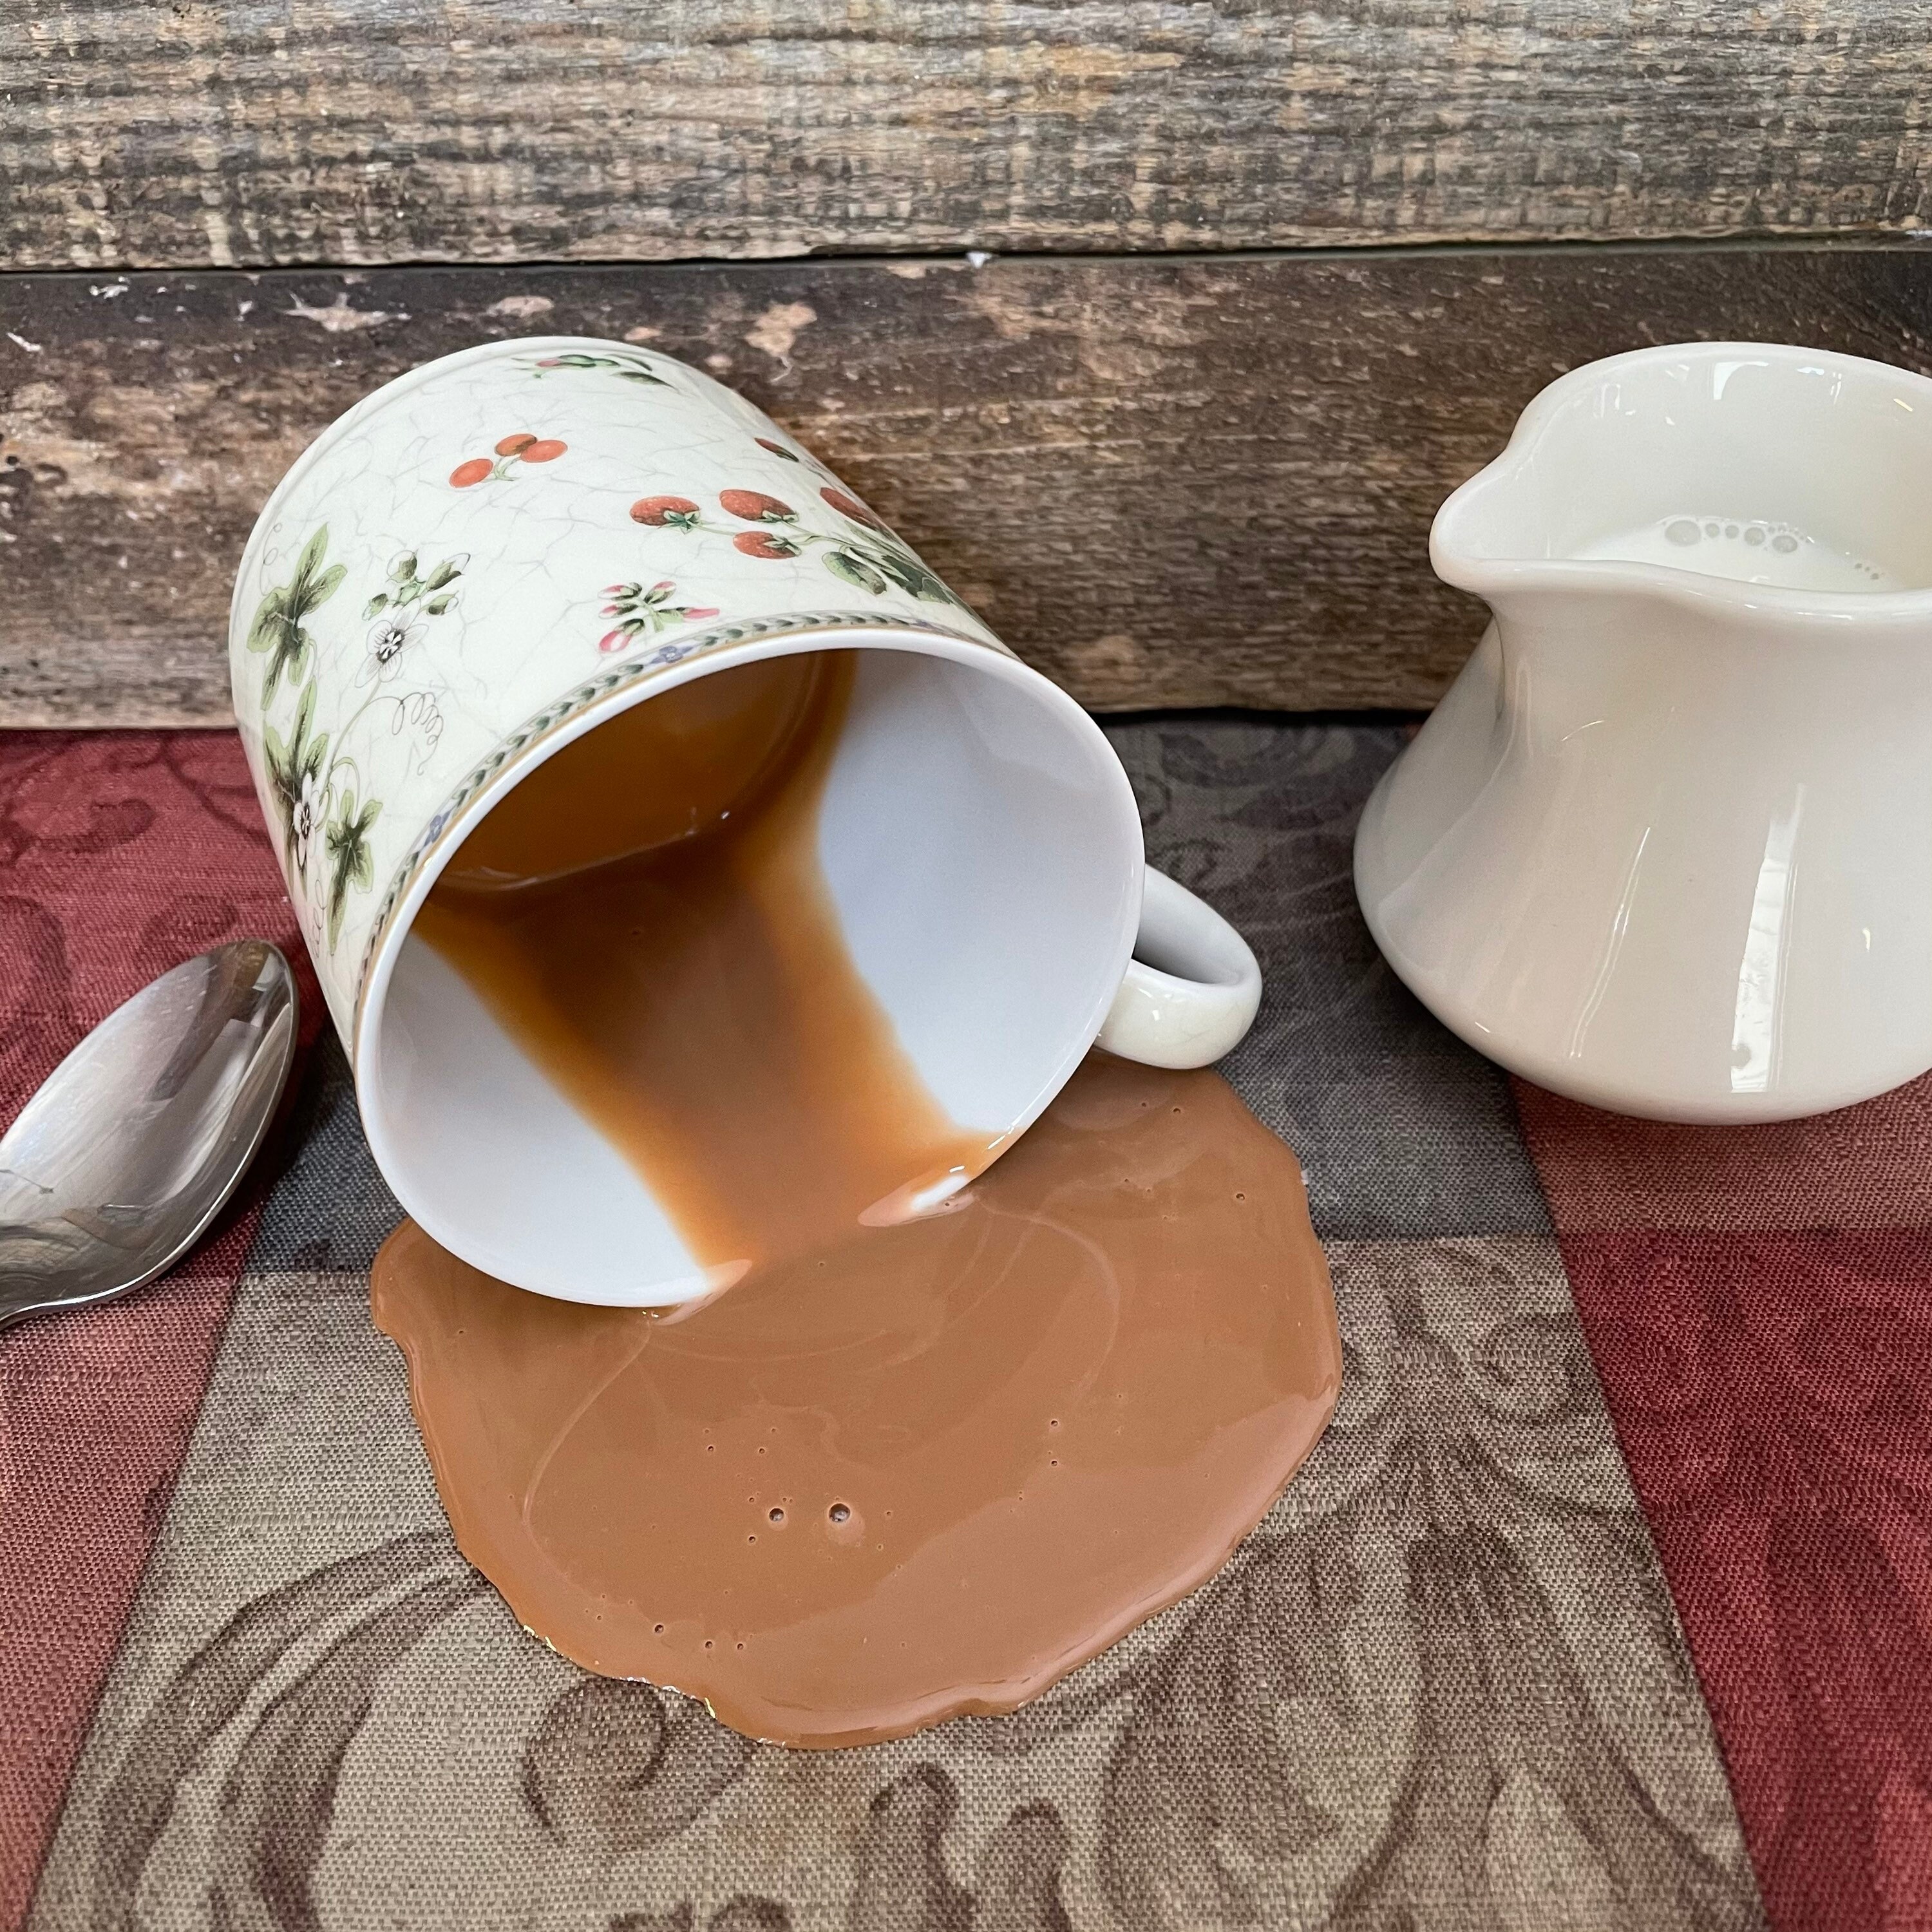 This fake cup of spilled coffee : r/mildlyinteresting